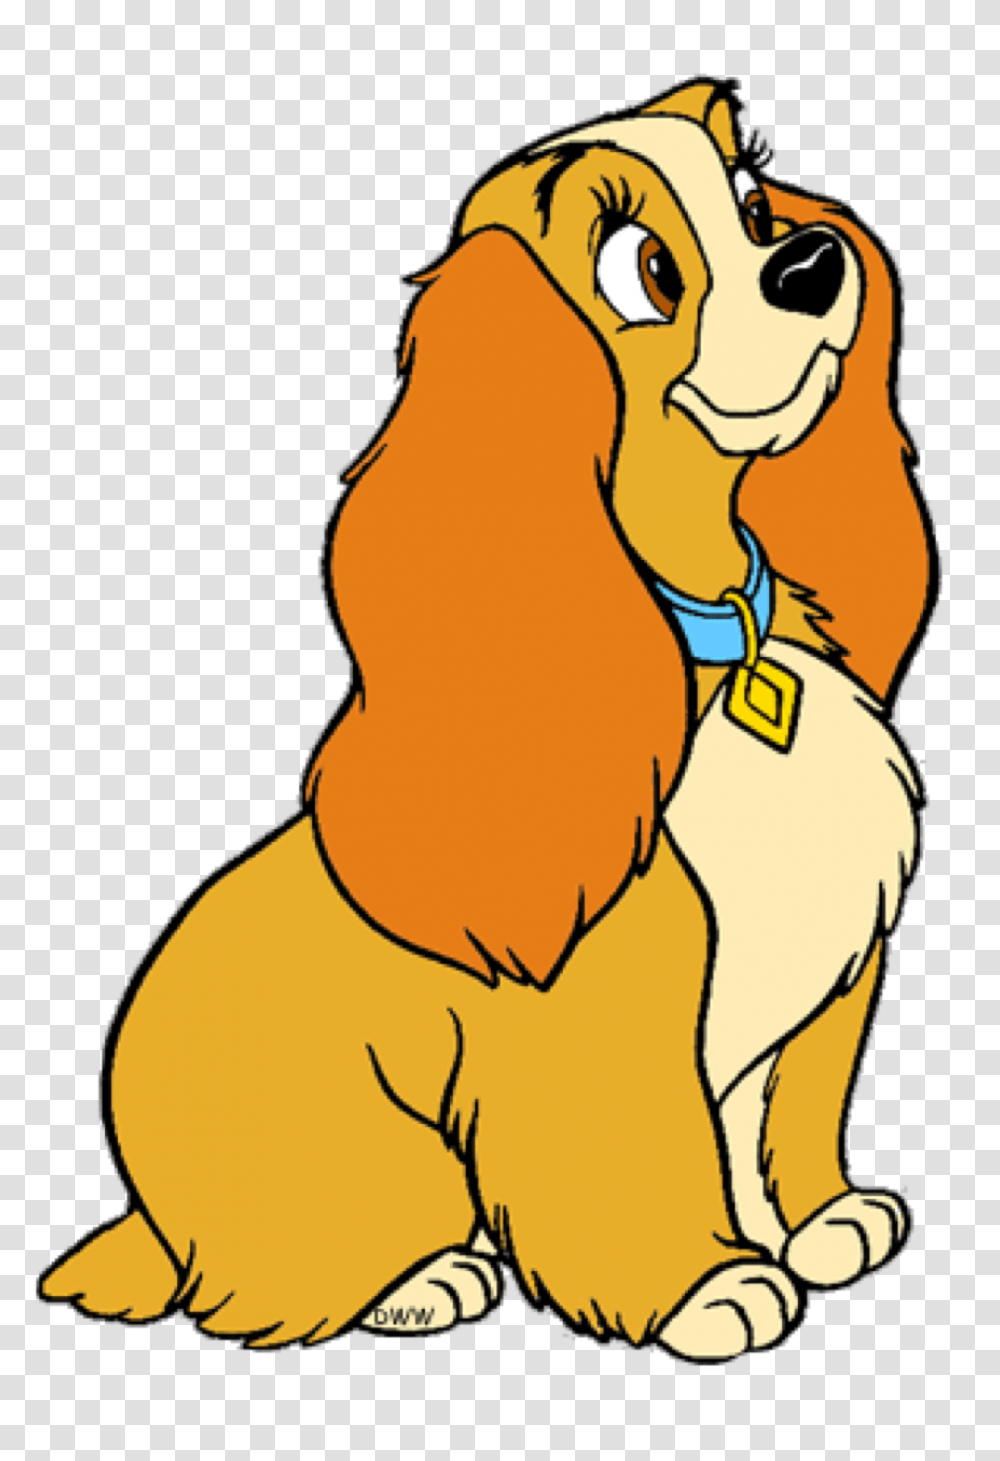 Disneys Lady And The Tramp Images Clip Art Hd Fond, Face, Mammal, Animal, Photography Transparent Png